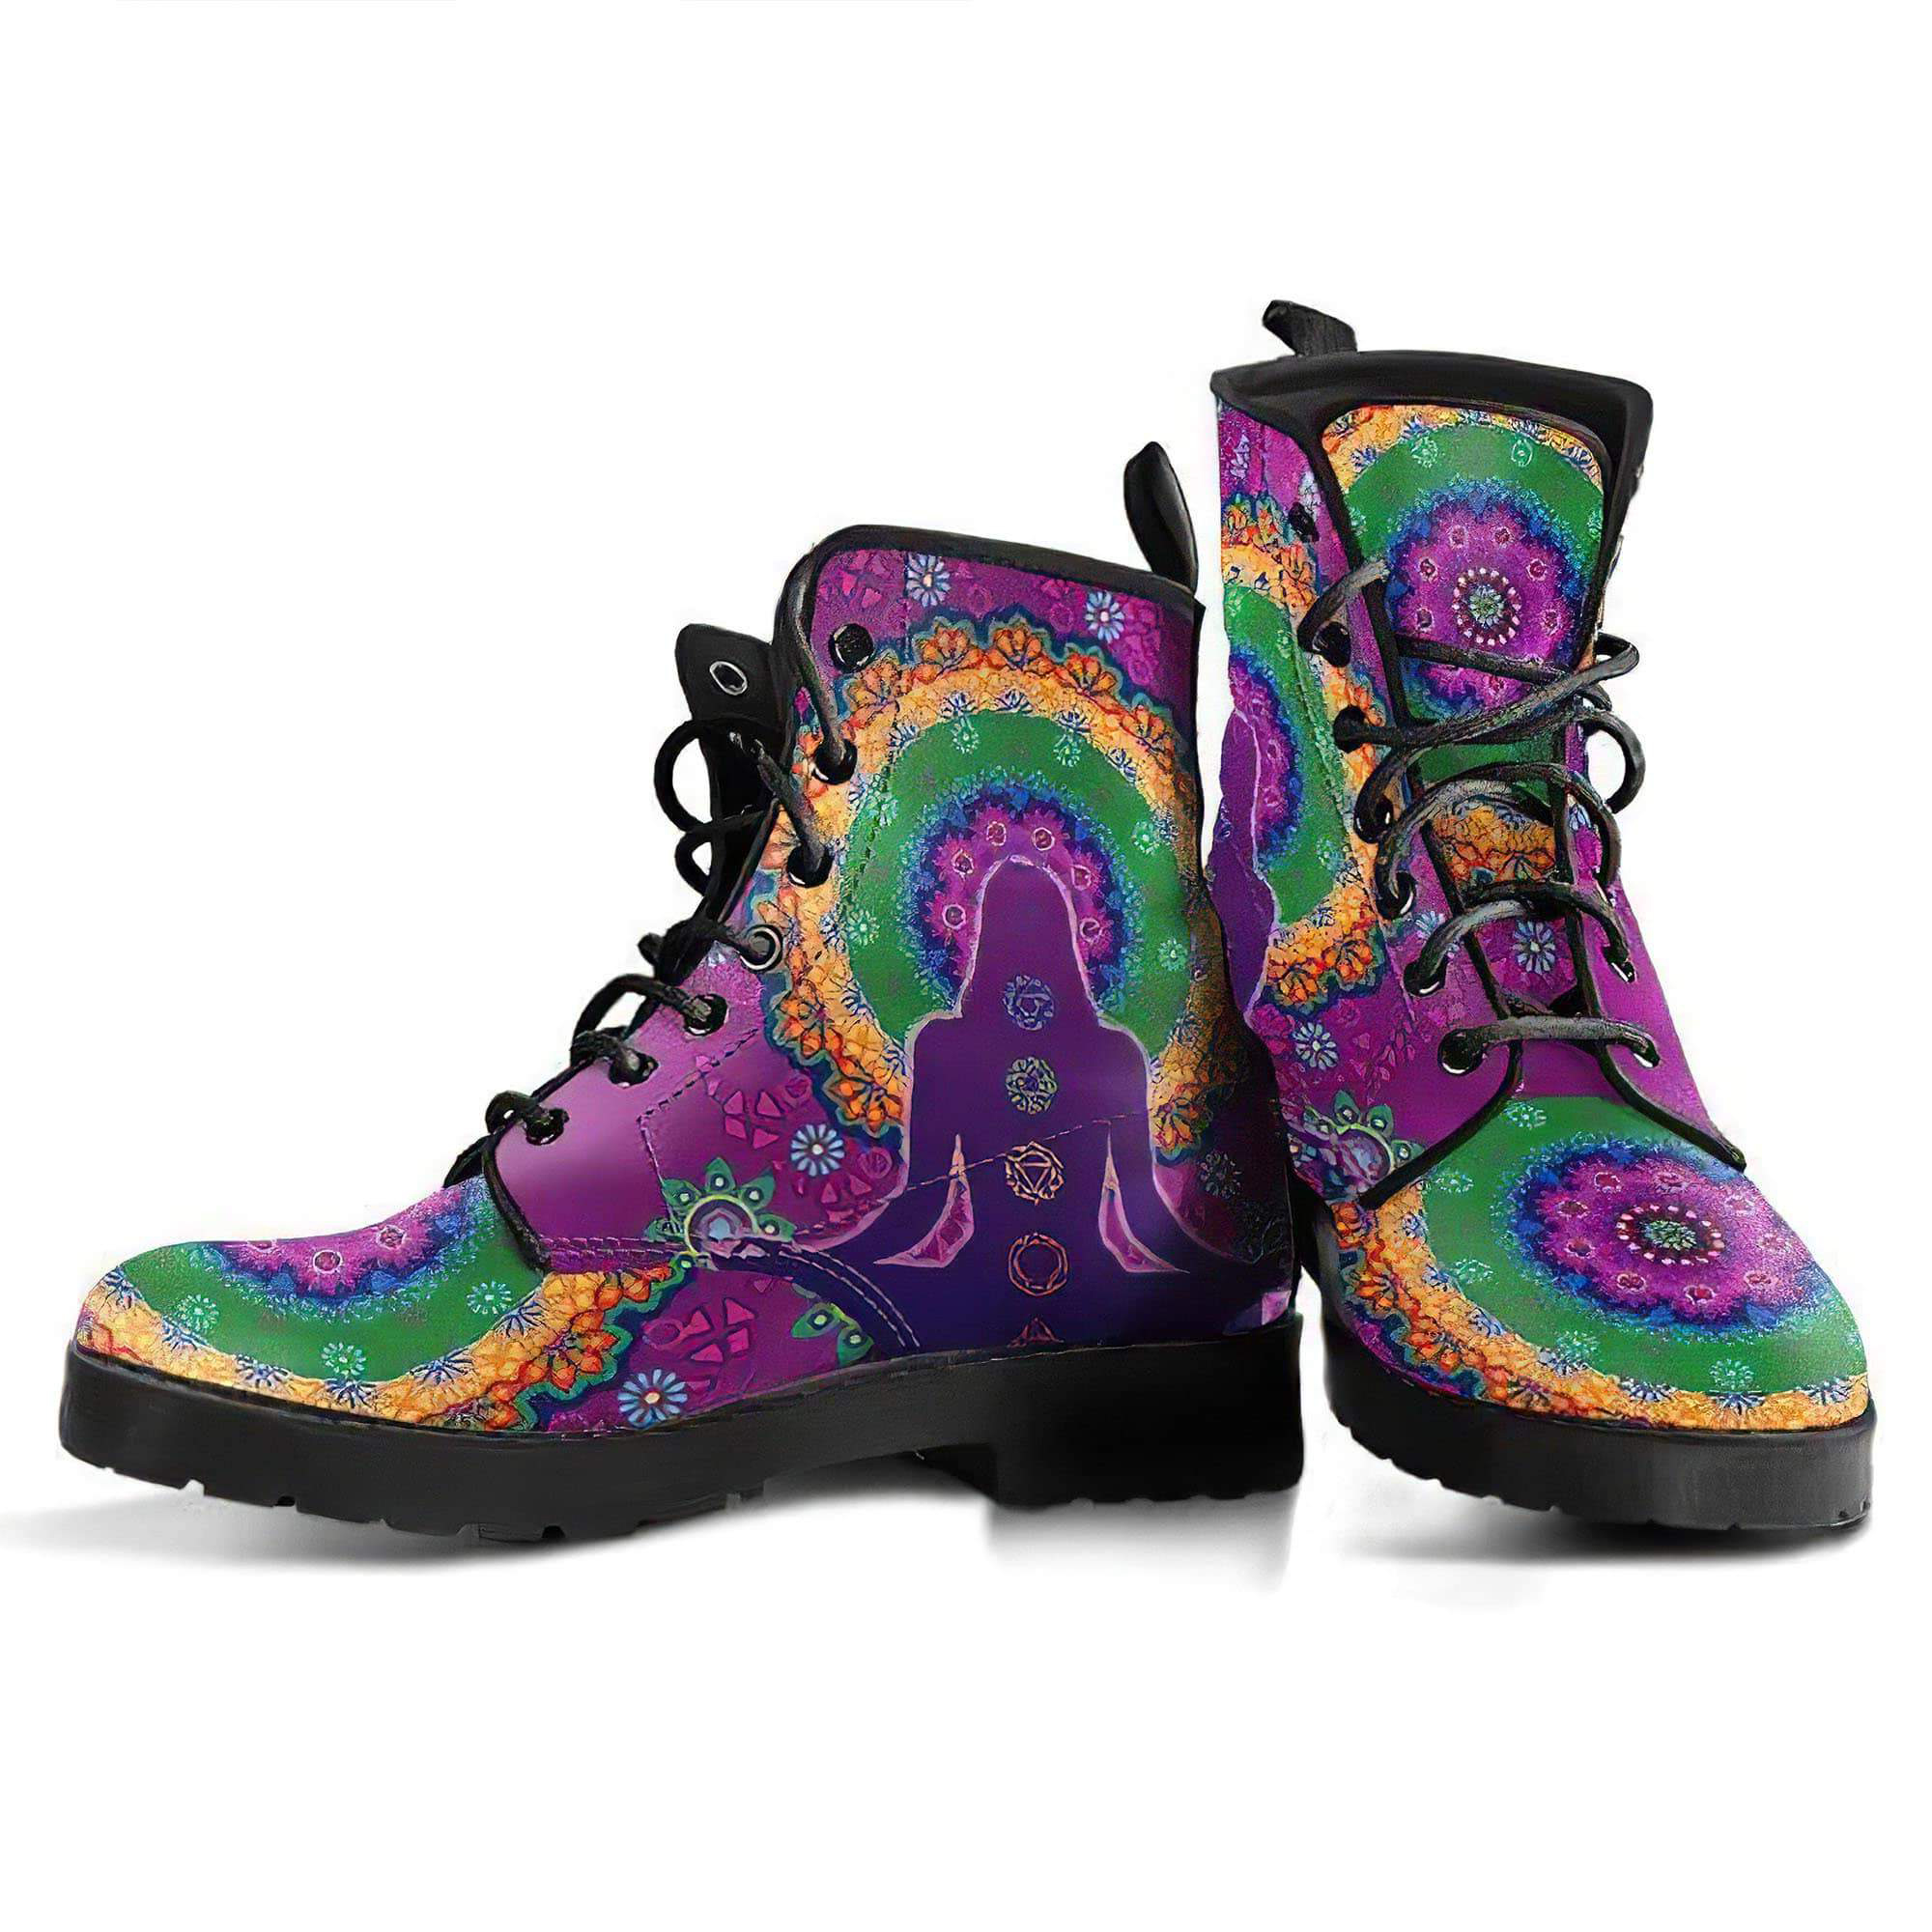 yoga-chakra-handcrafted-boots-women-s-leather-boots-12051985989693.jpg